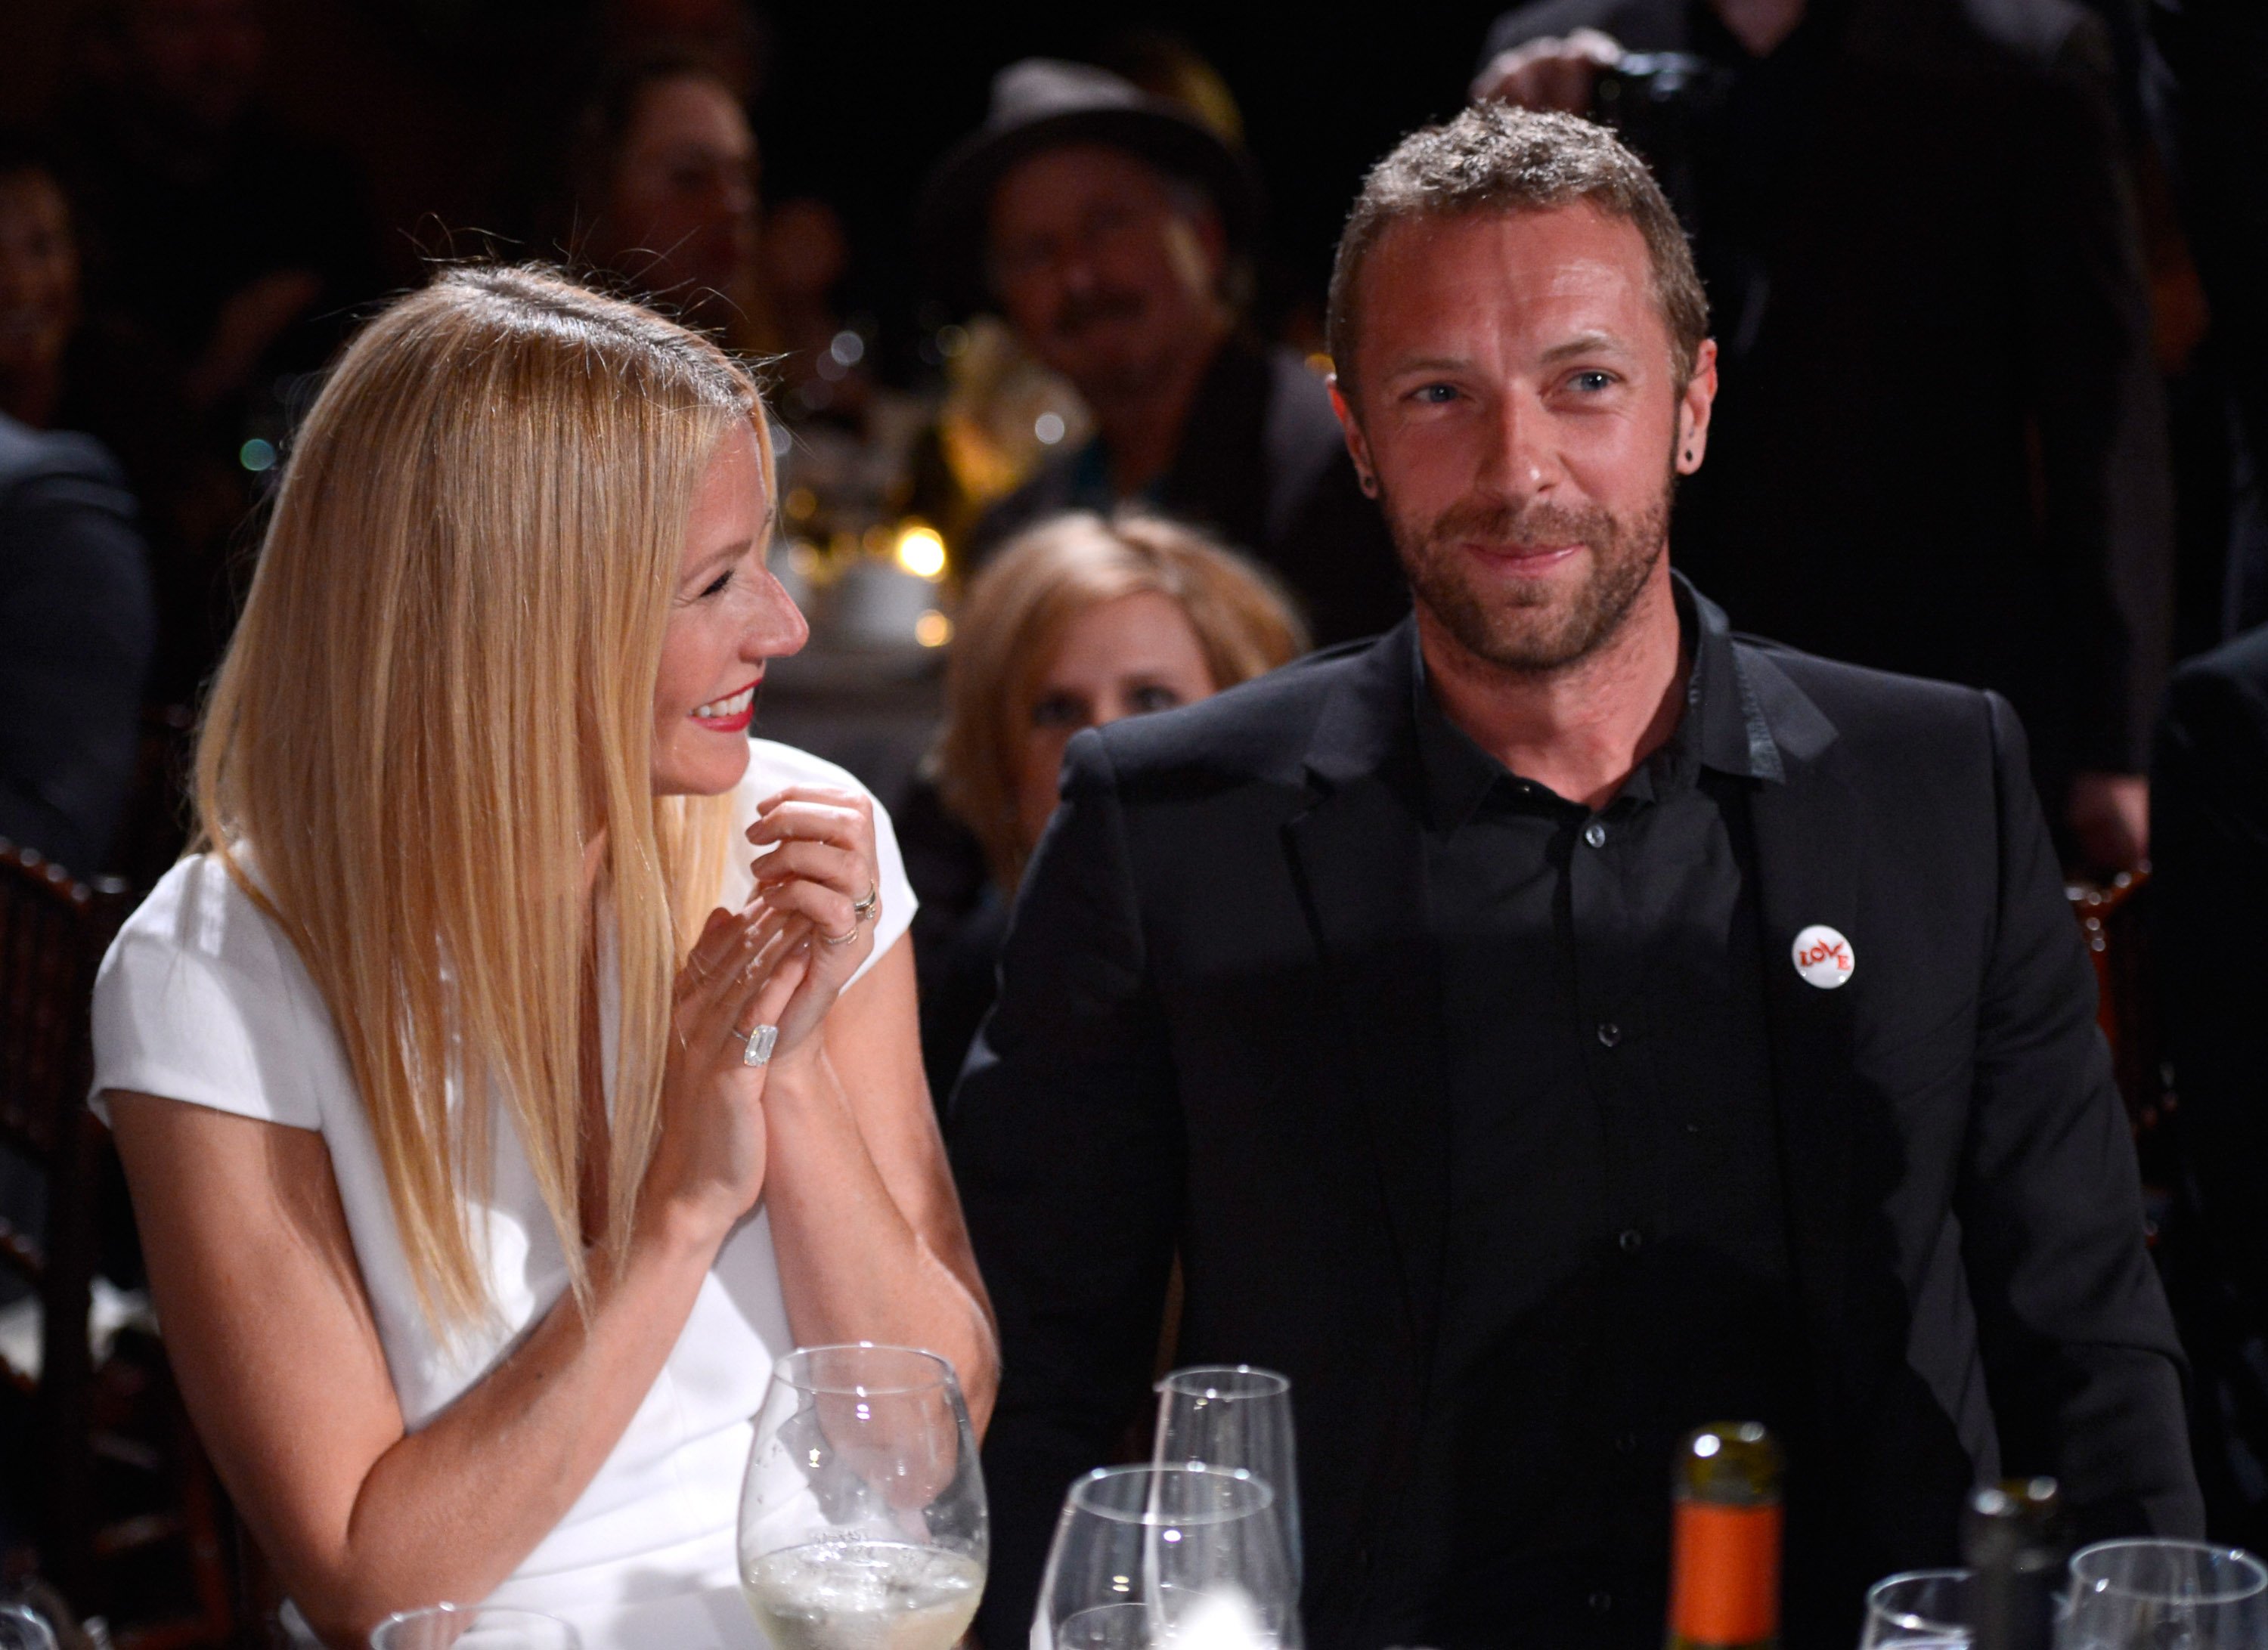 Gwyneth Paltrow and Chris Martin attend the 3rd annual Sean Penn & Friends HELP HAITI HOME Gala benefiting J/P HRO presented by Giorgio Armani at Montage Beverly Hills on January 11, 2014 in Beverly Hills, California | Source: Getty Image